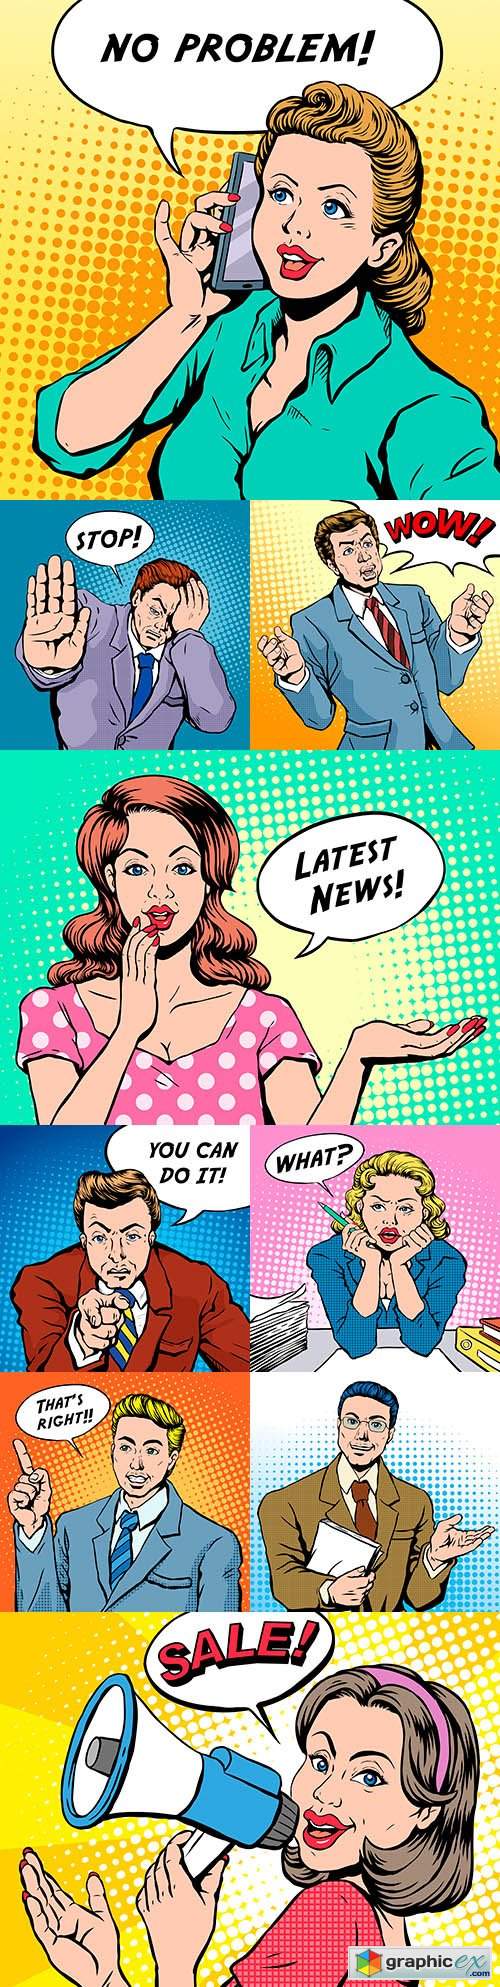  Woman and Man Pop art illustration with speech forms 